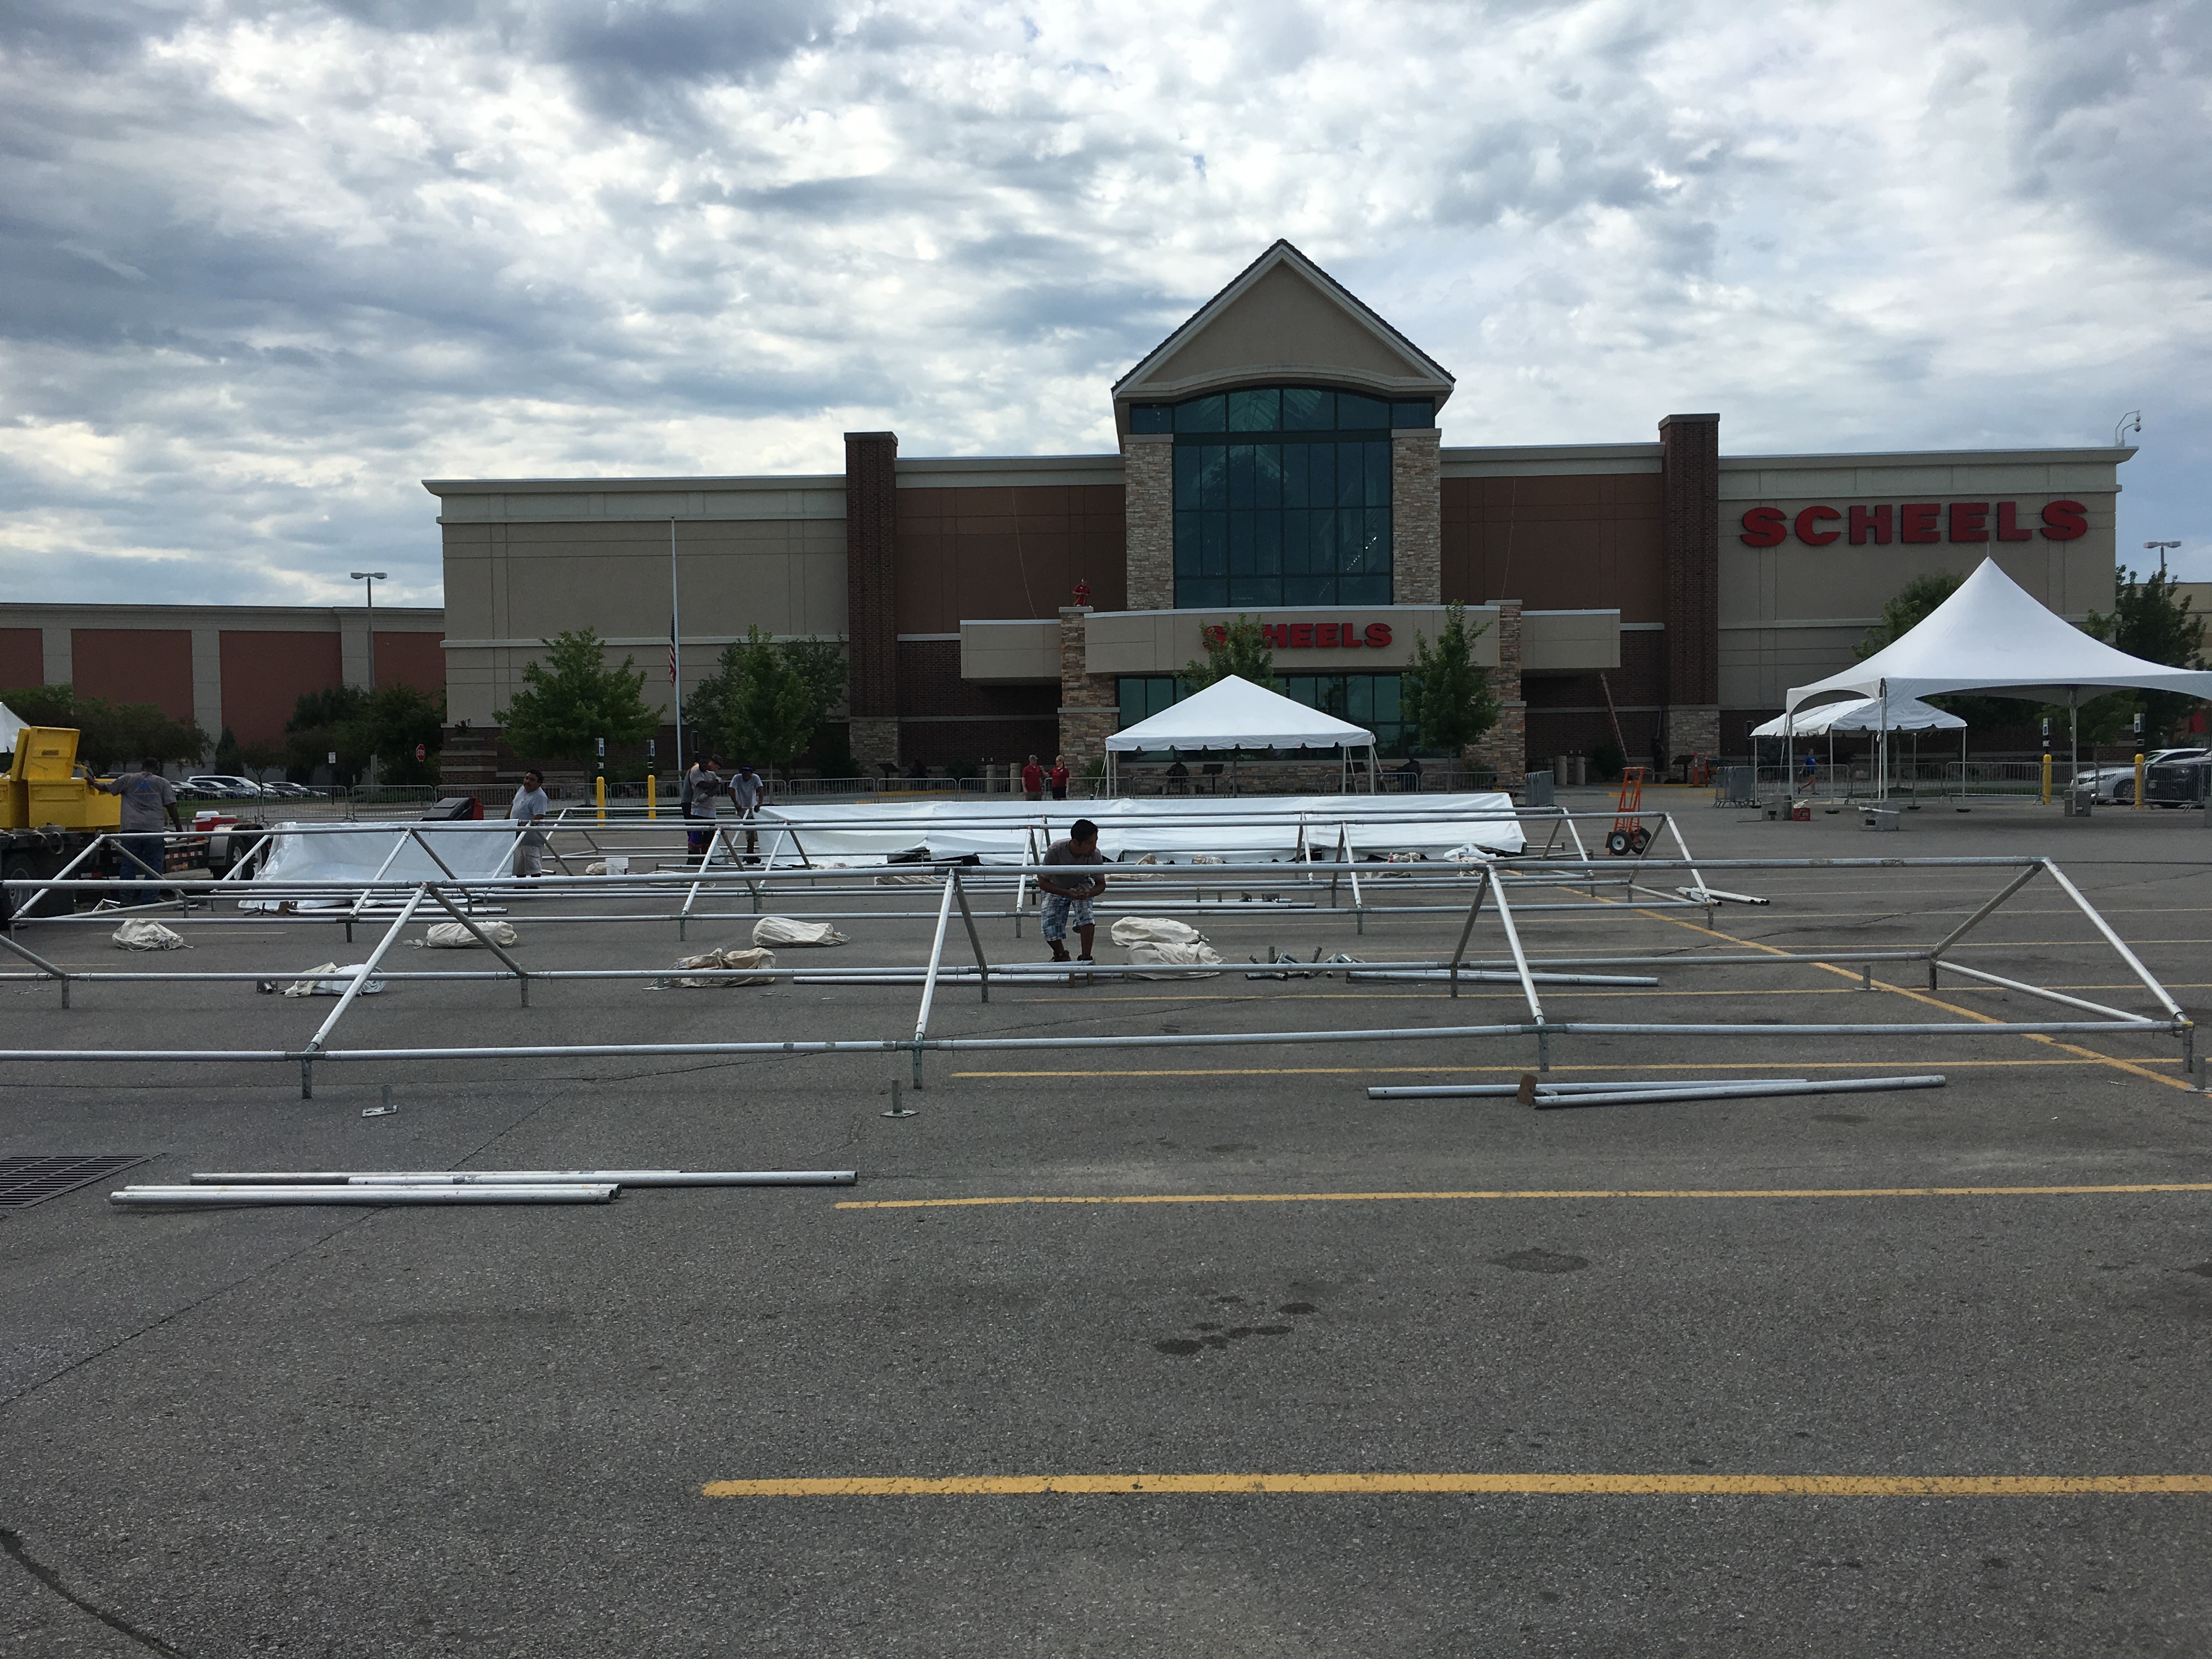 Setting up frame tents at Scheels in Des Moines, Iowa